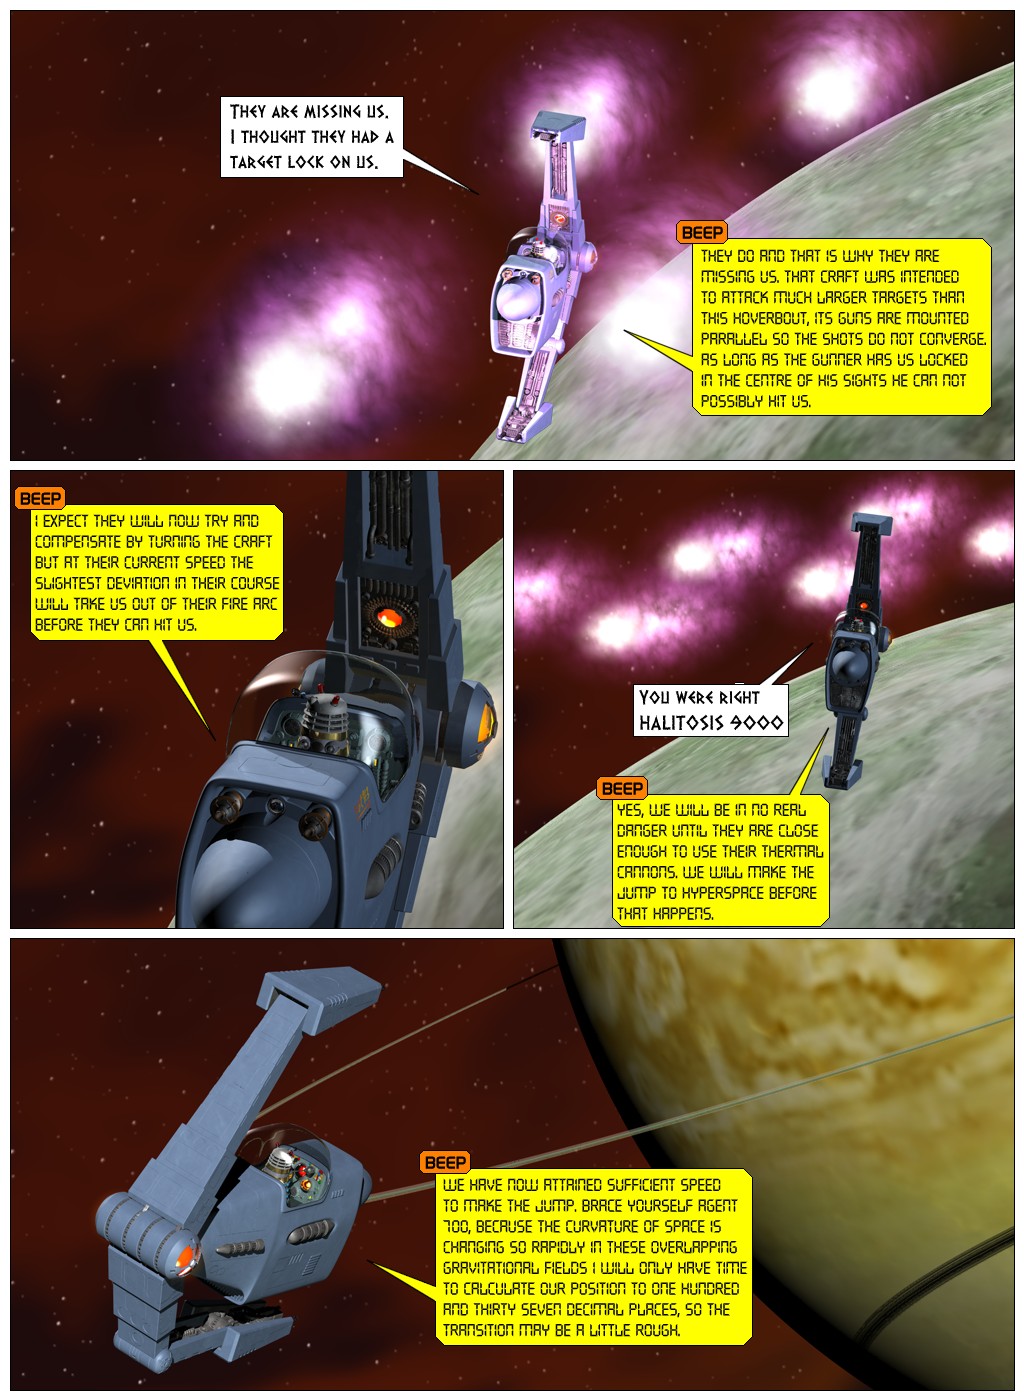 Page 216 - click for next